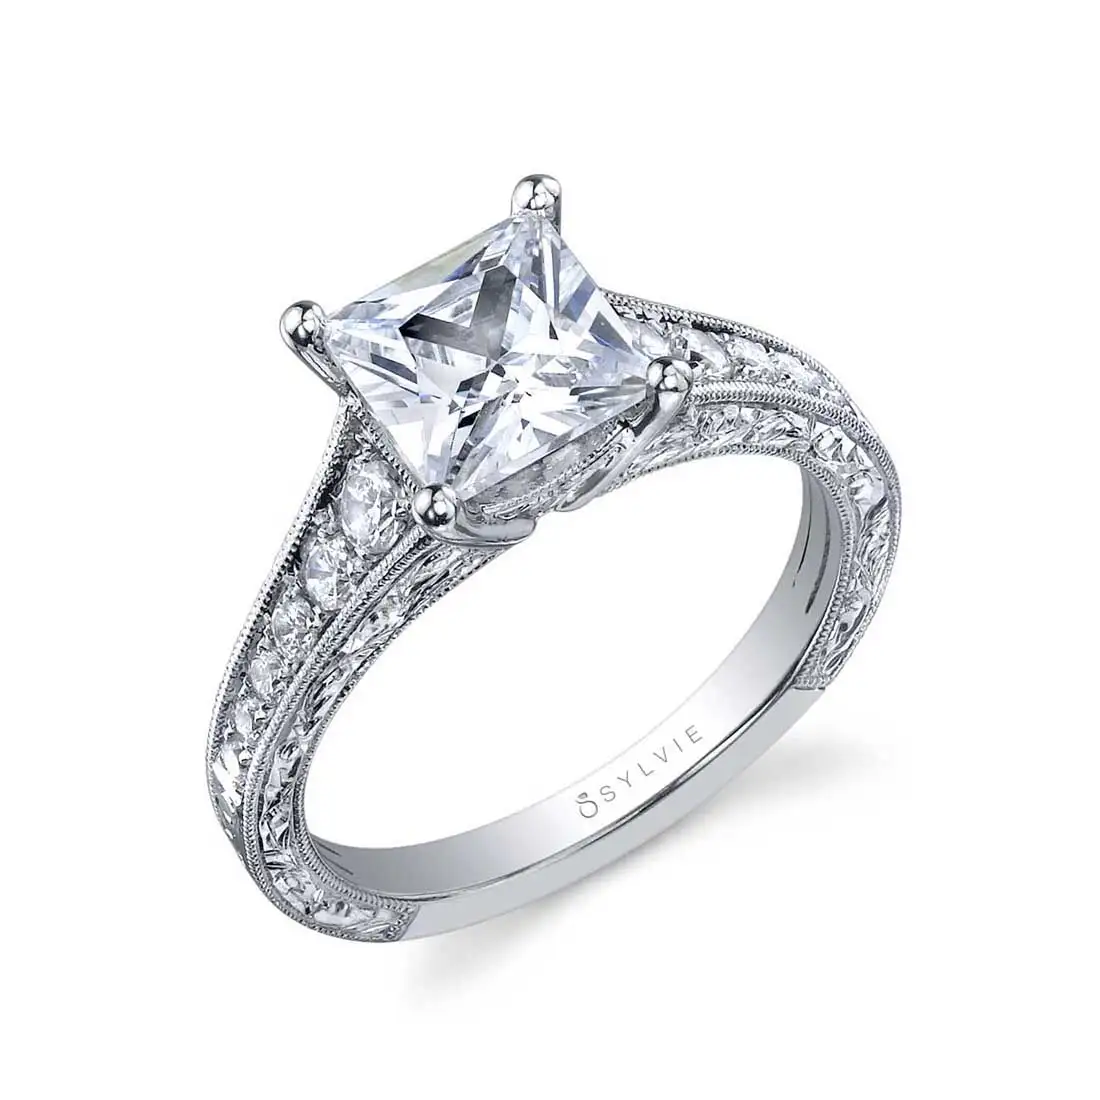 Profile Image of a Princess Cut Engagement Ring